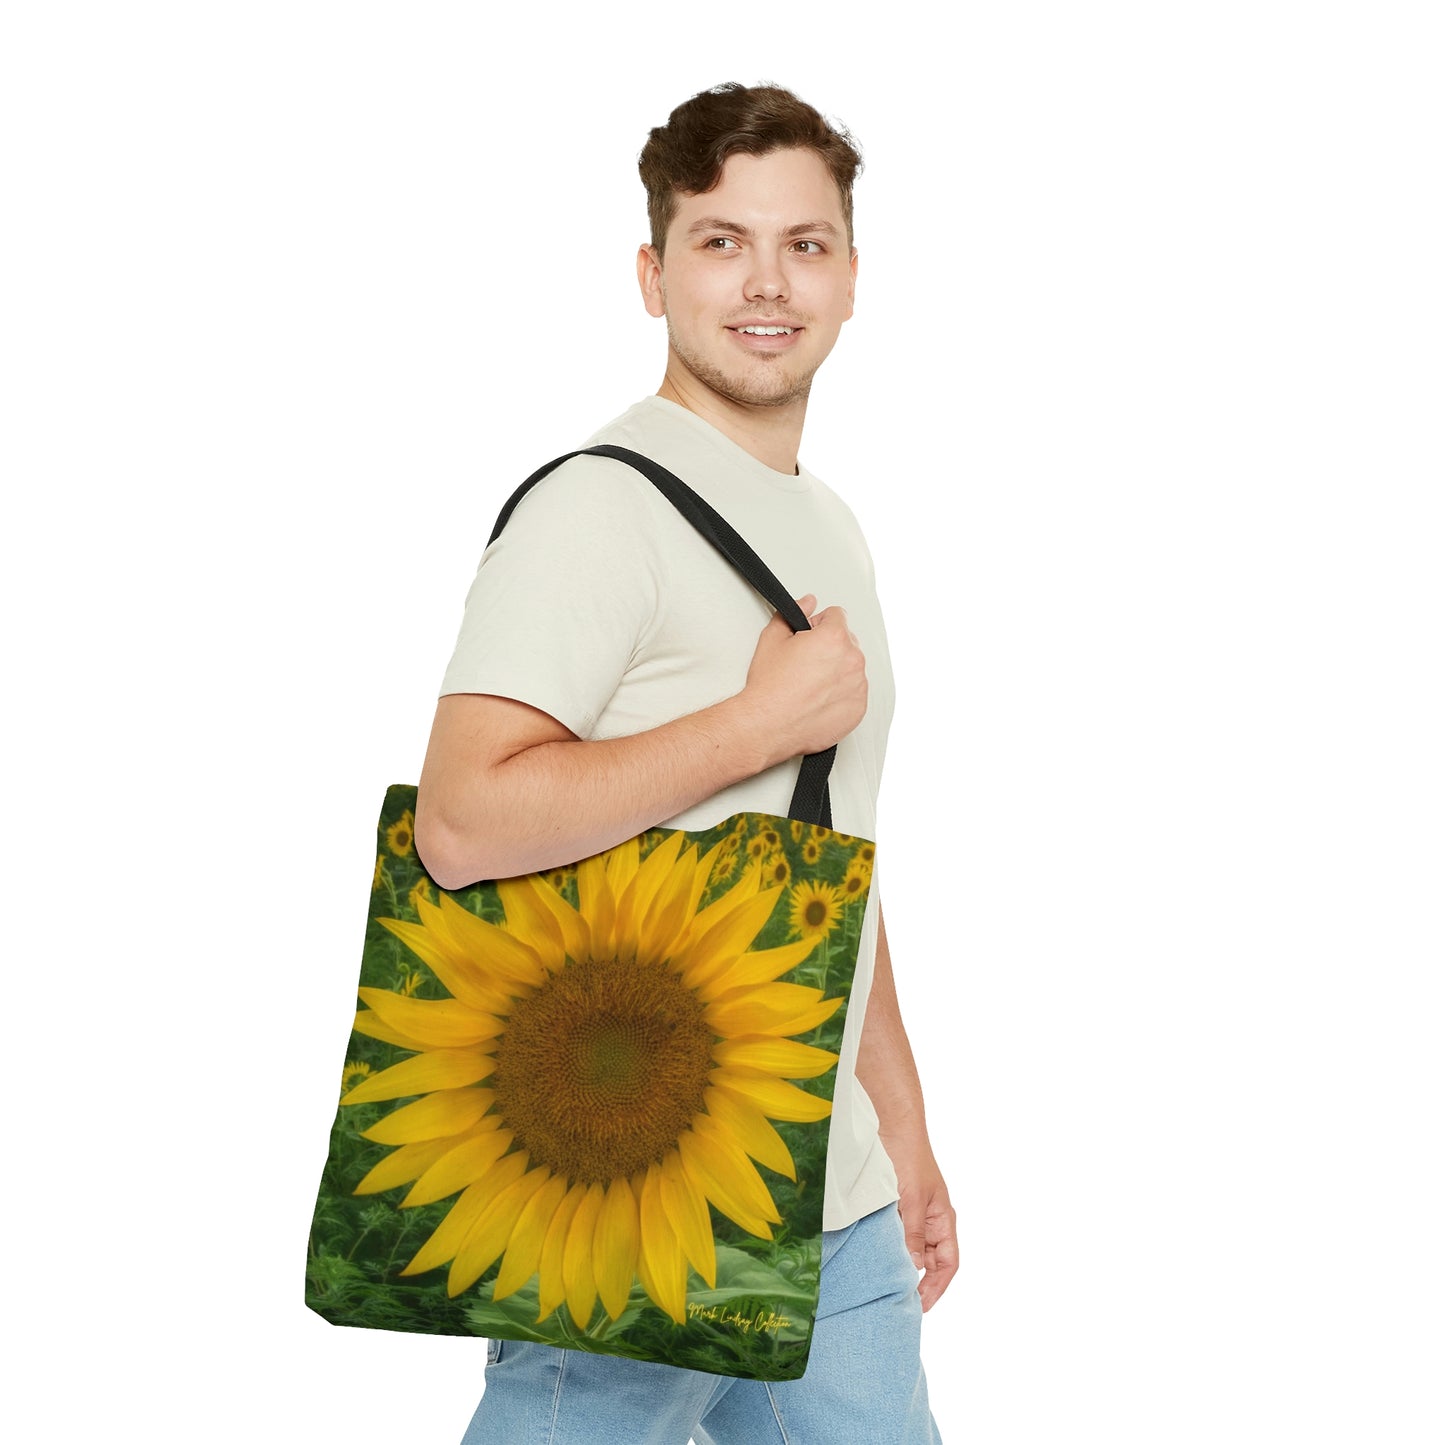 The Lead Sunflower Art Tote